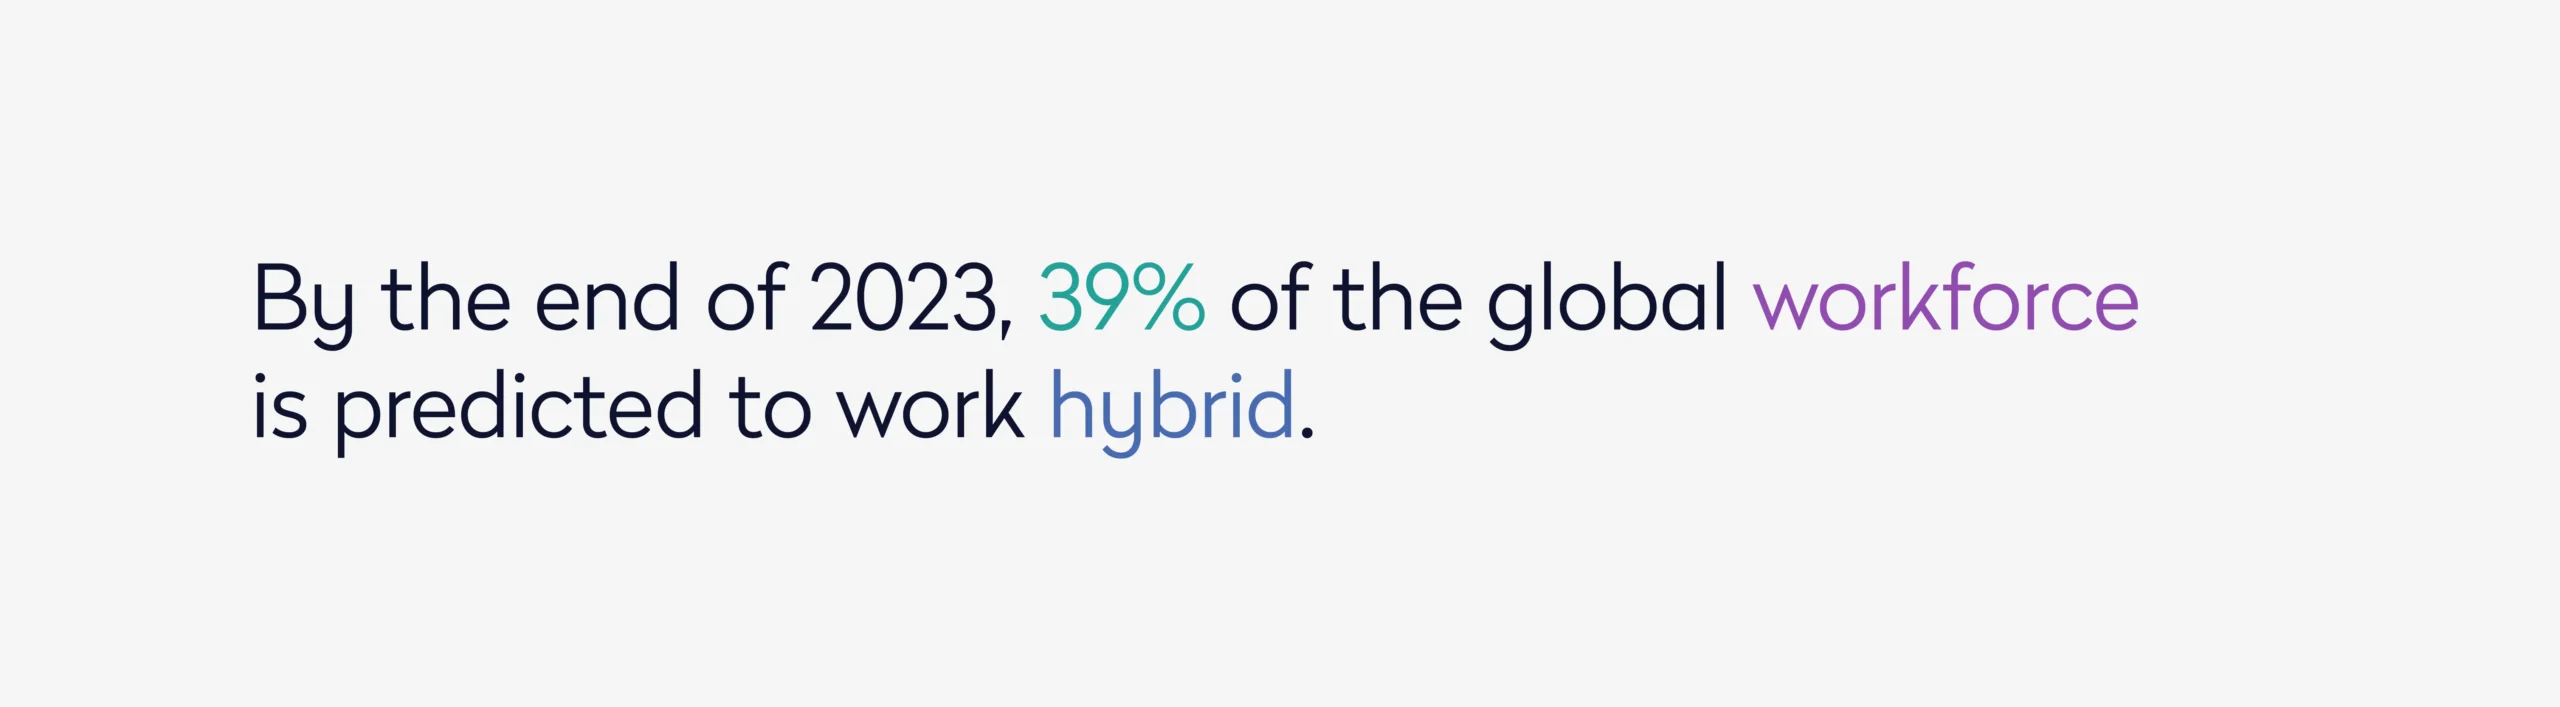 By the end of 2023 39 percent of the global workforce is predicted to work hybrid.